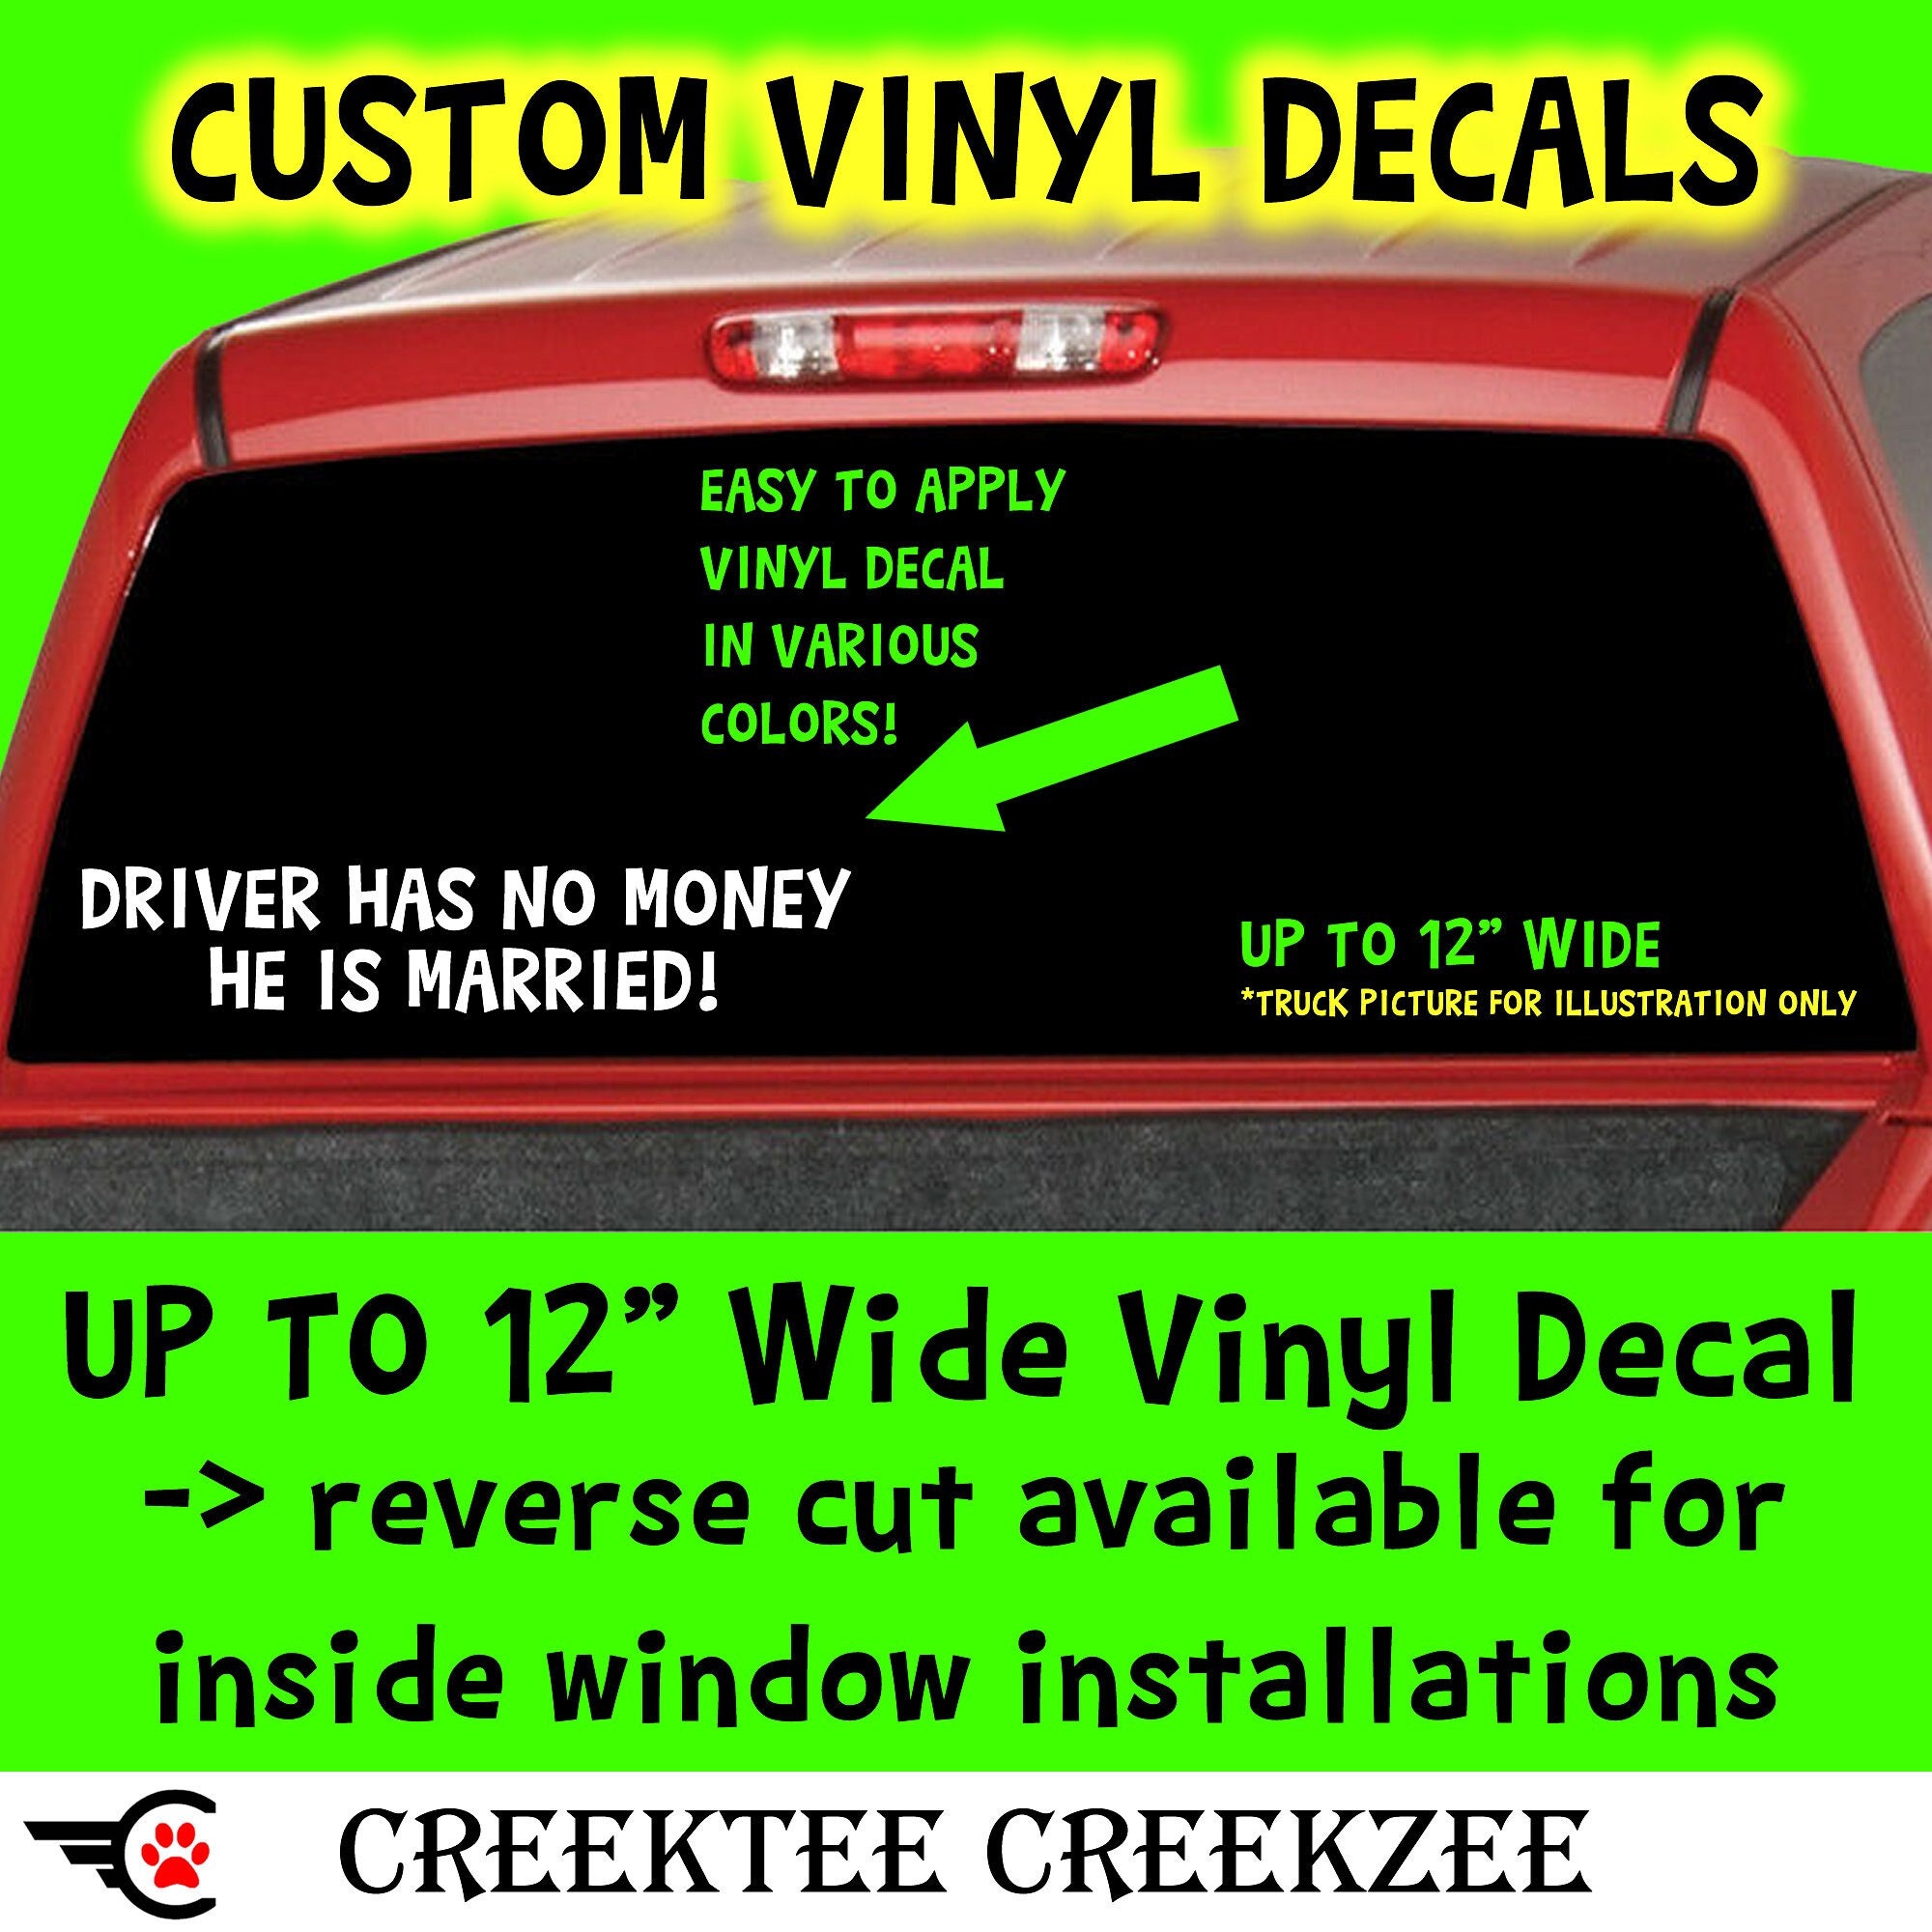 Driver has no money he is married in Color Vinyl Various Sizes and Colors Die Cut Vinyl Decal also in Cool Chrome Colors!